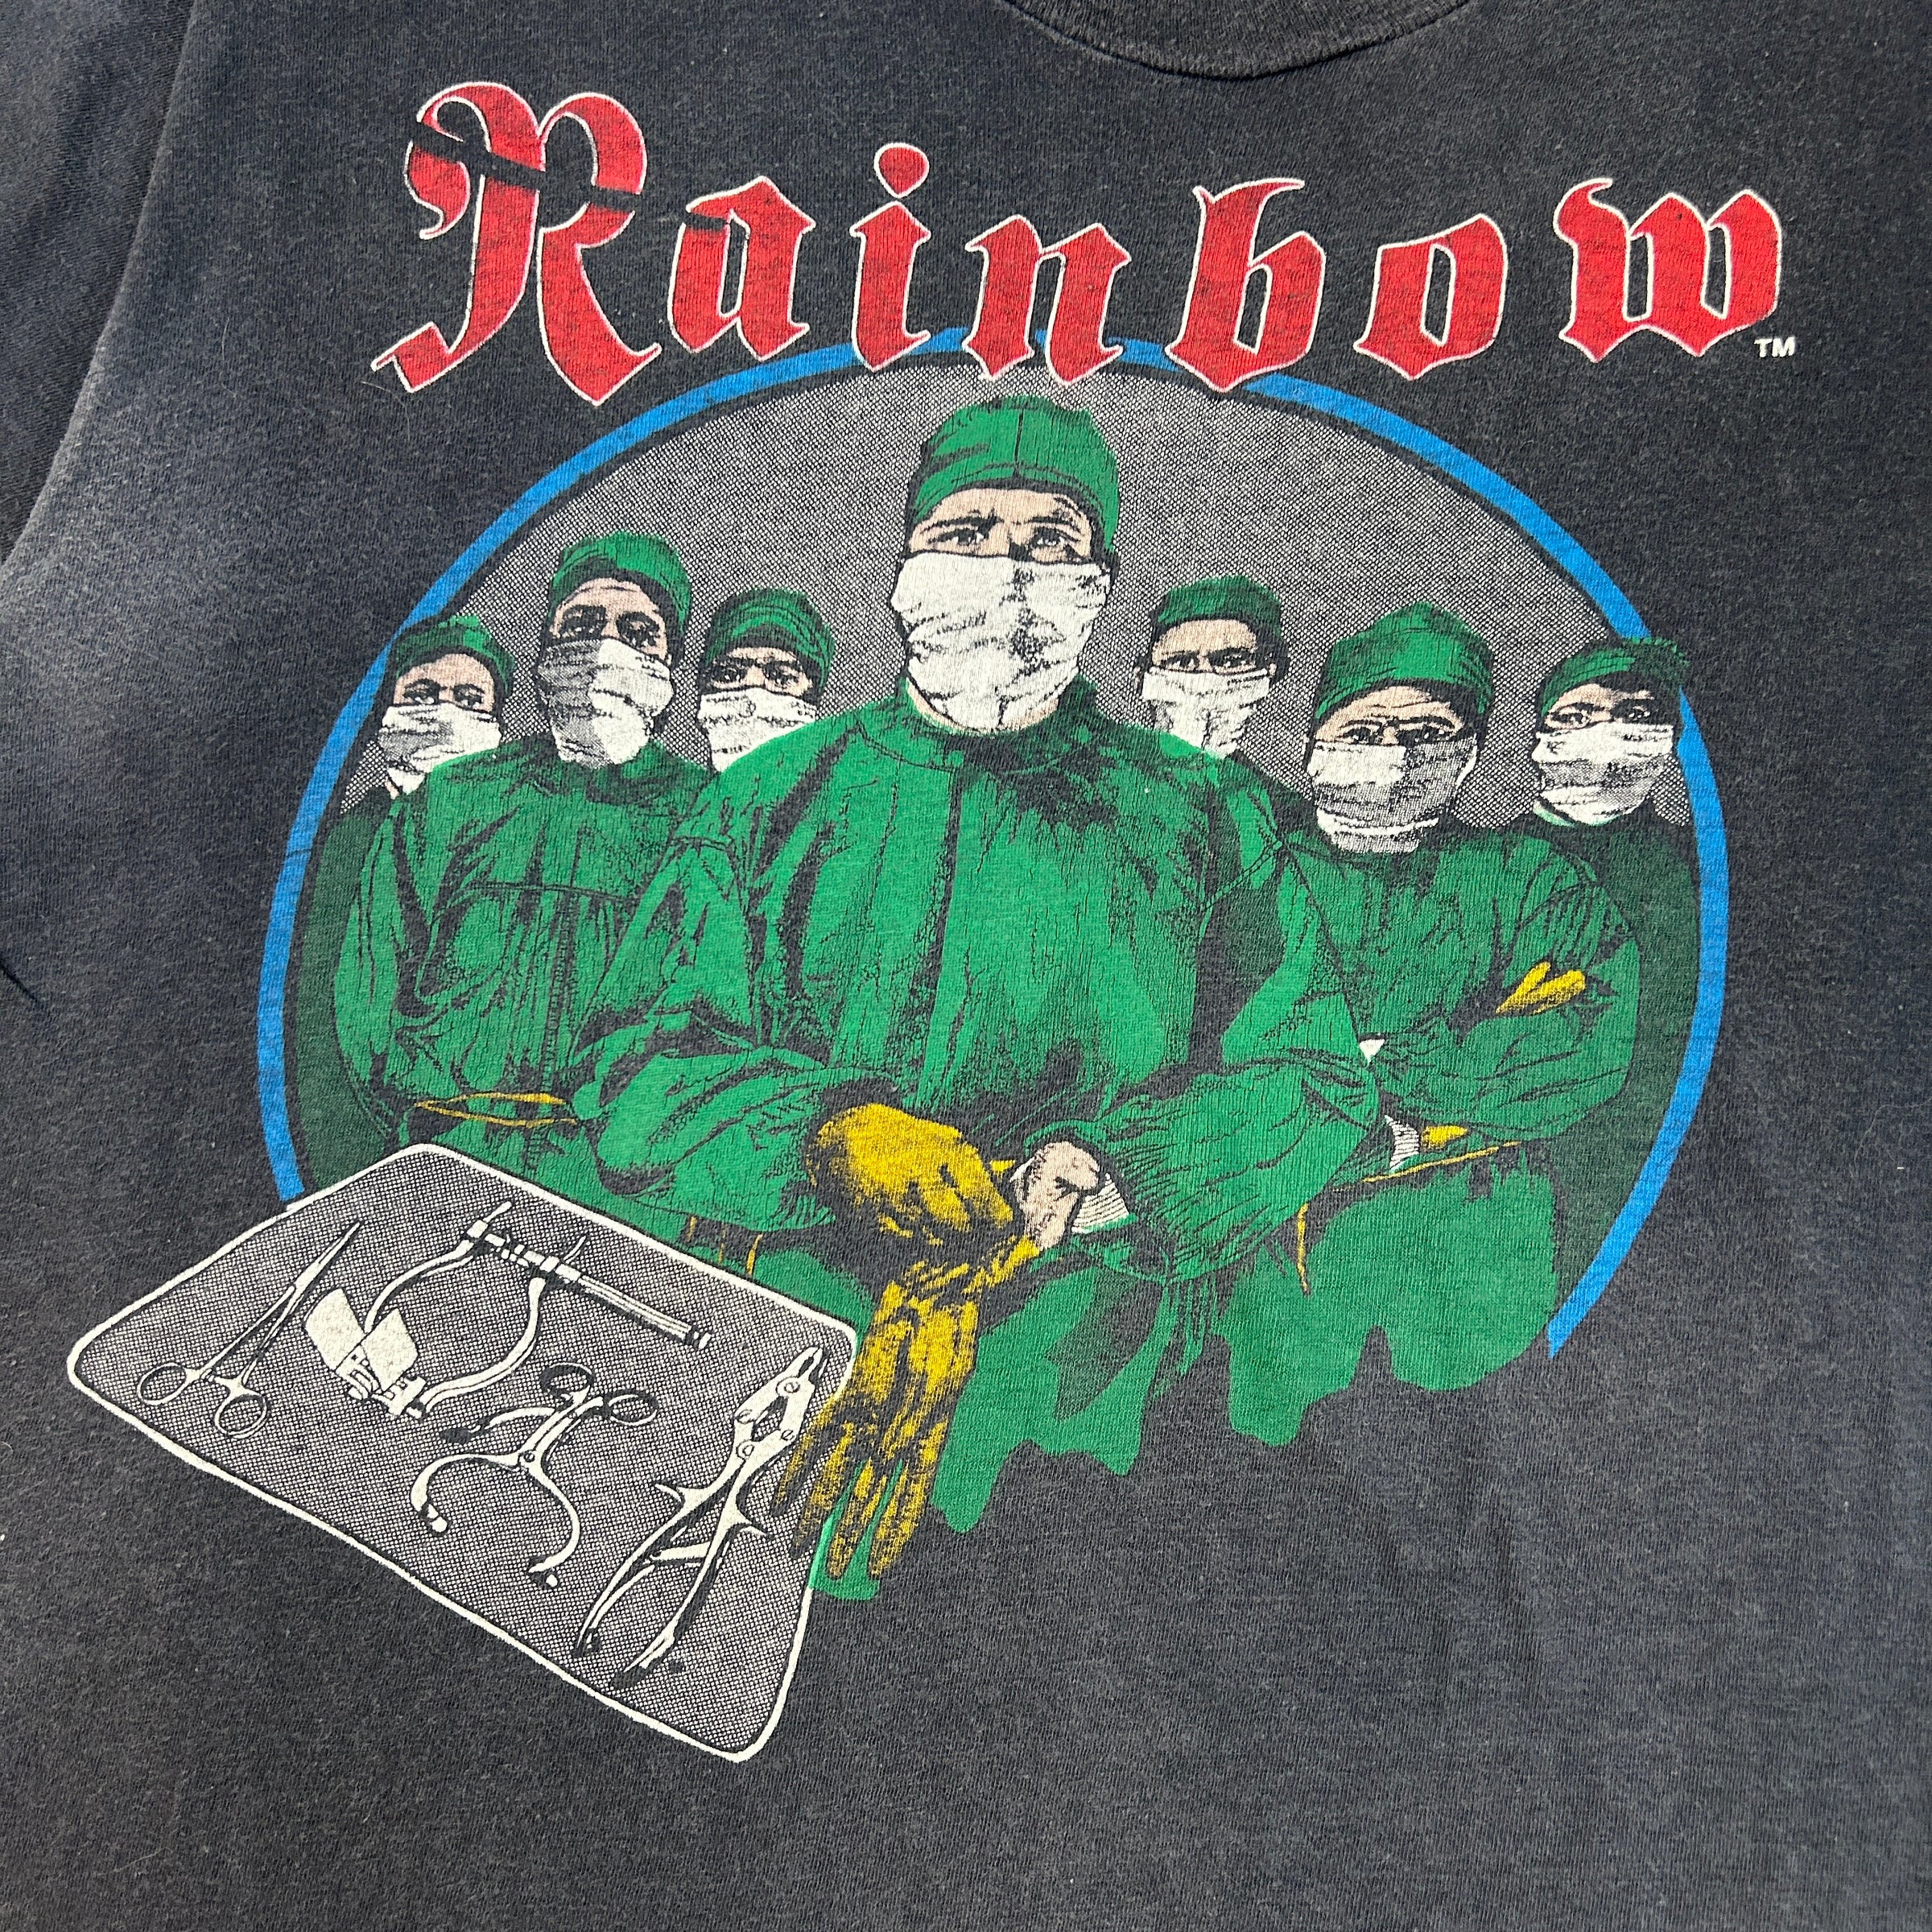 Rainbow Difficult to Cure World Tour Black Shirt from 1978 – Vintage Rock in Bold Black